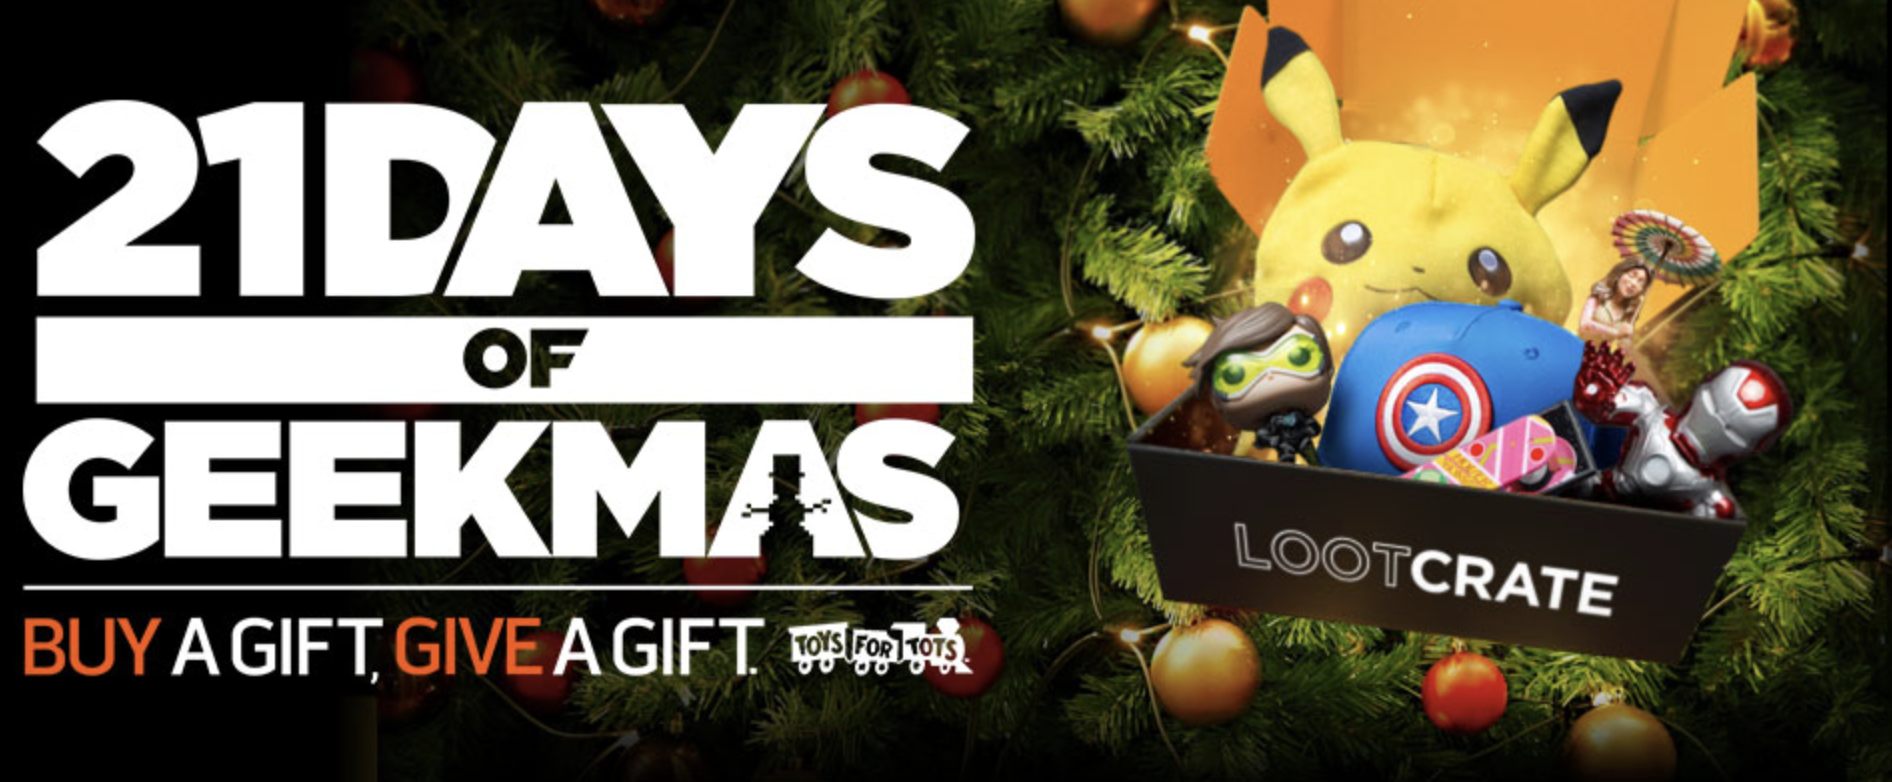 Loot Crate 21 Days of Geekmas Day 1 Sales Start Now!